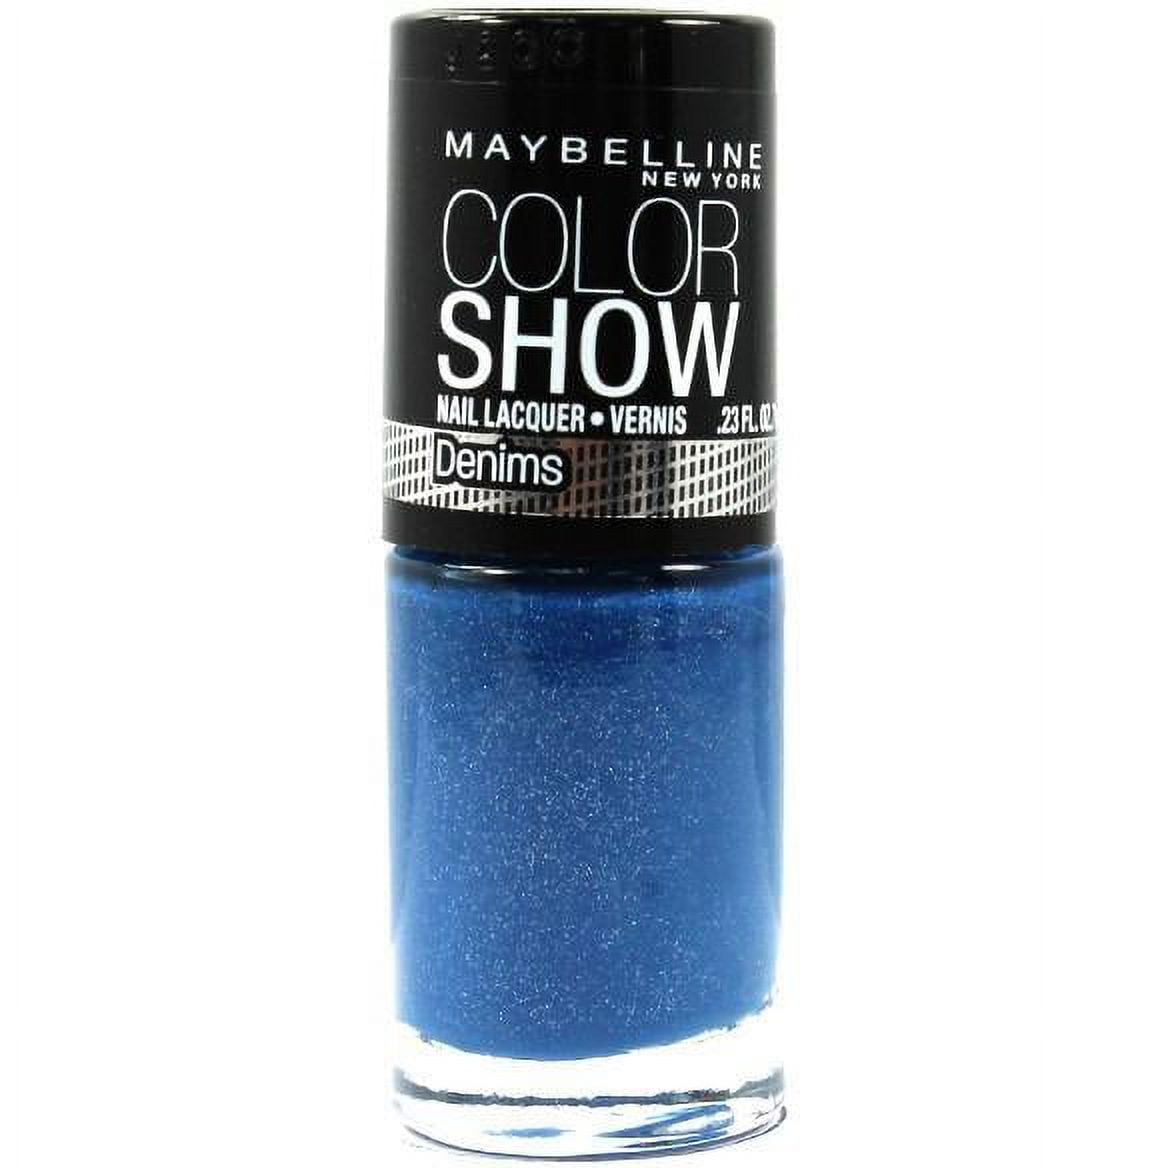 Maybelline Color Show - Cinderella Pink - 001 - Review & Swatches